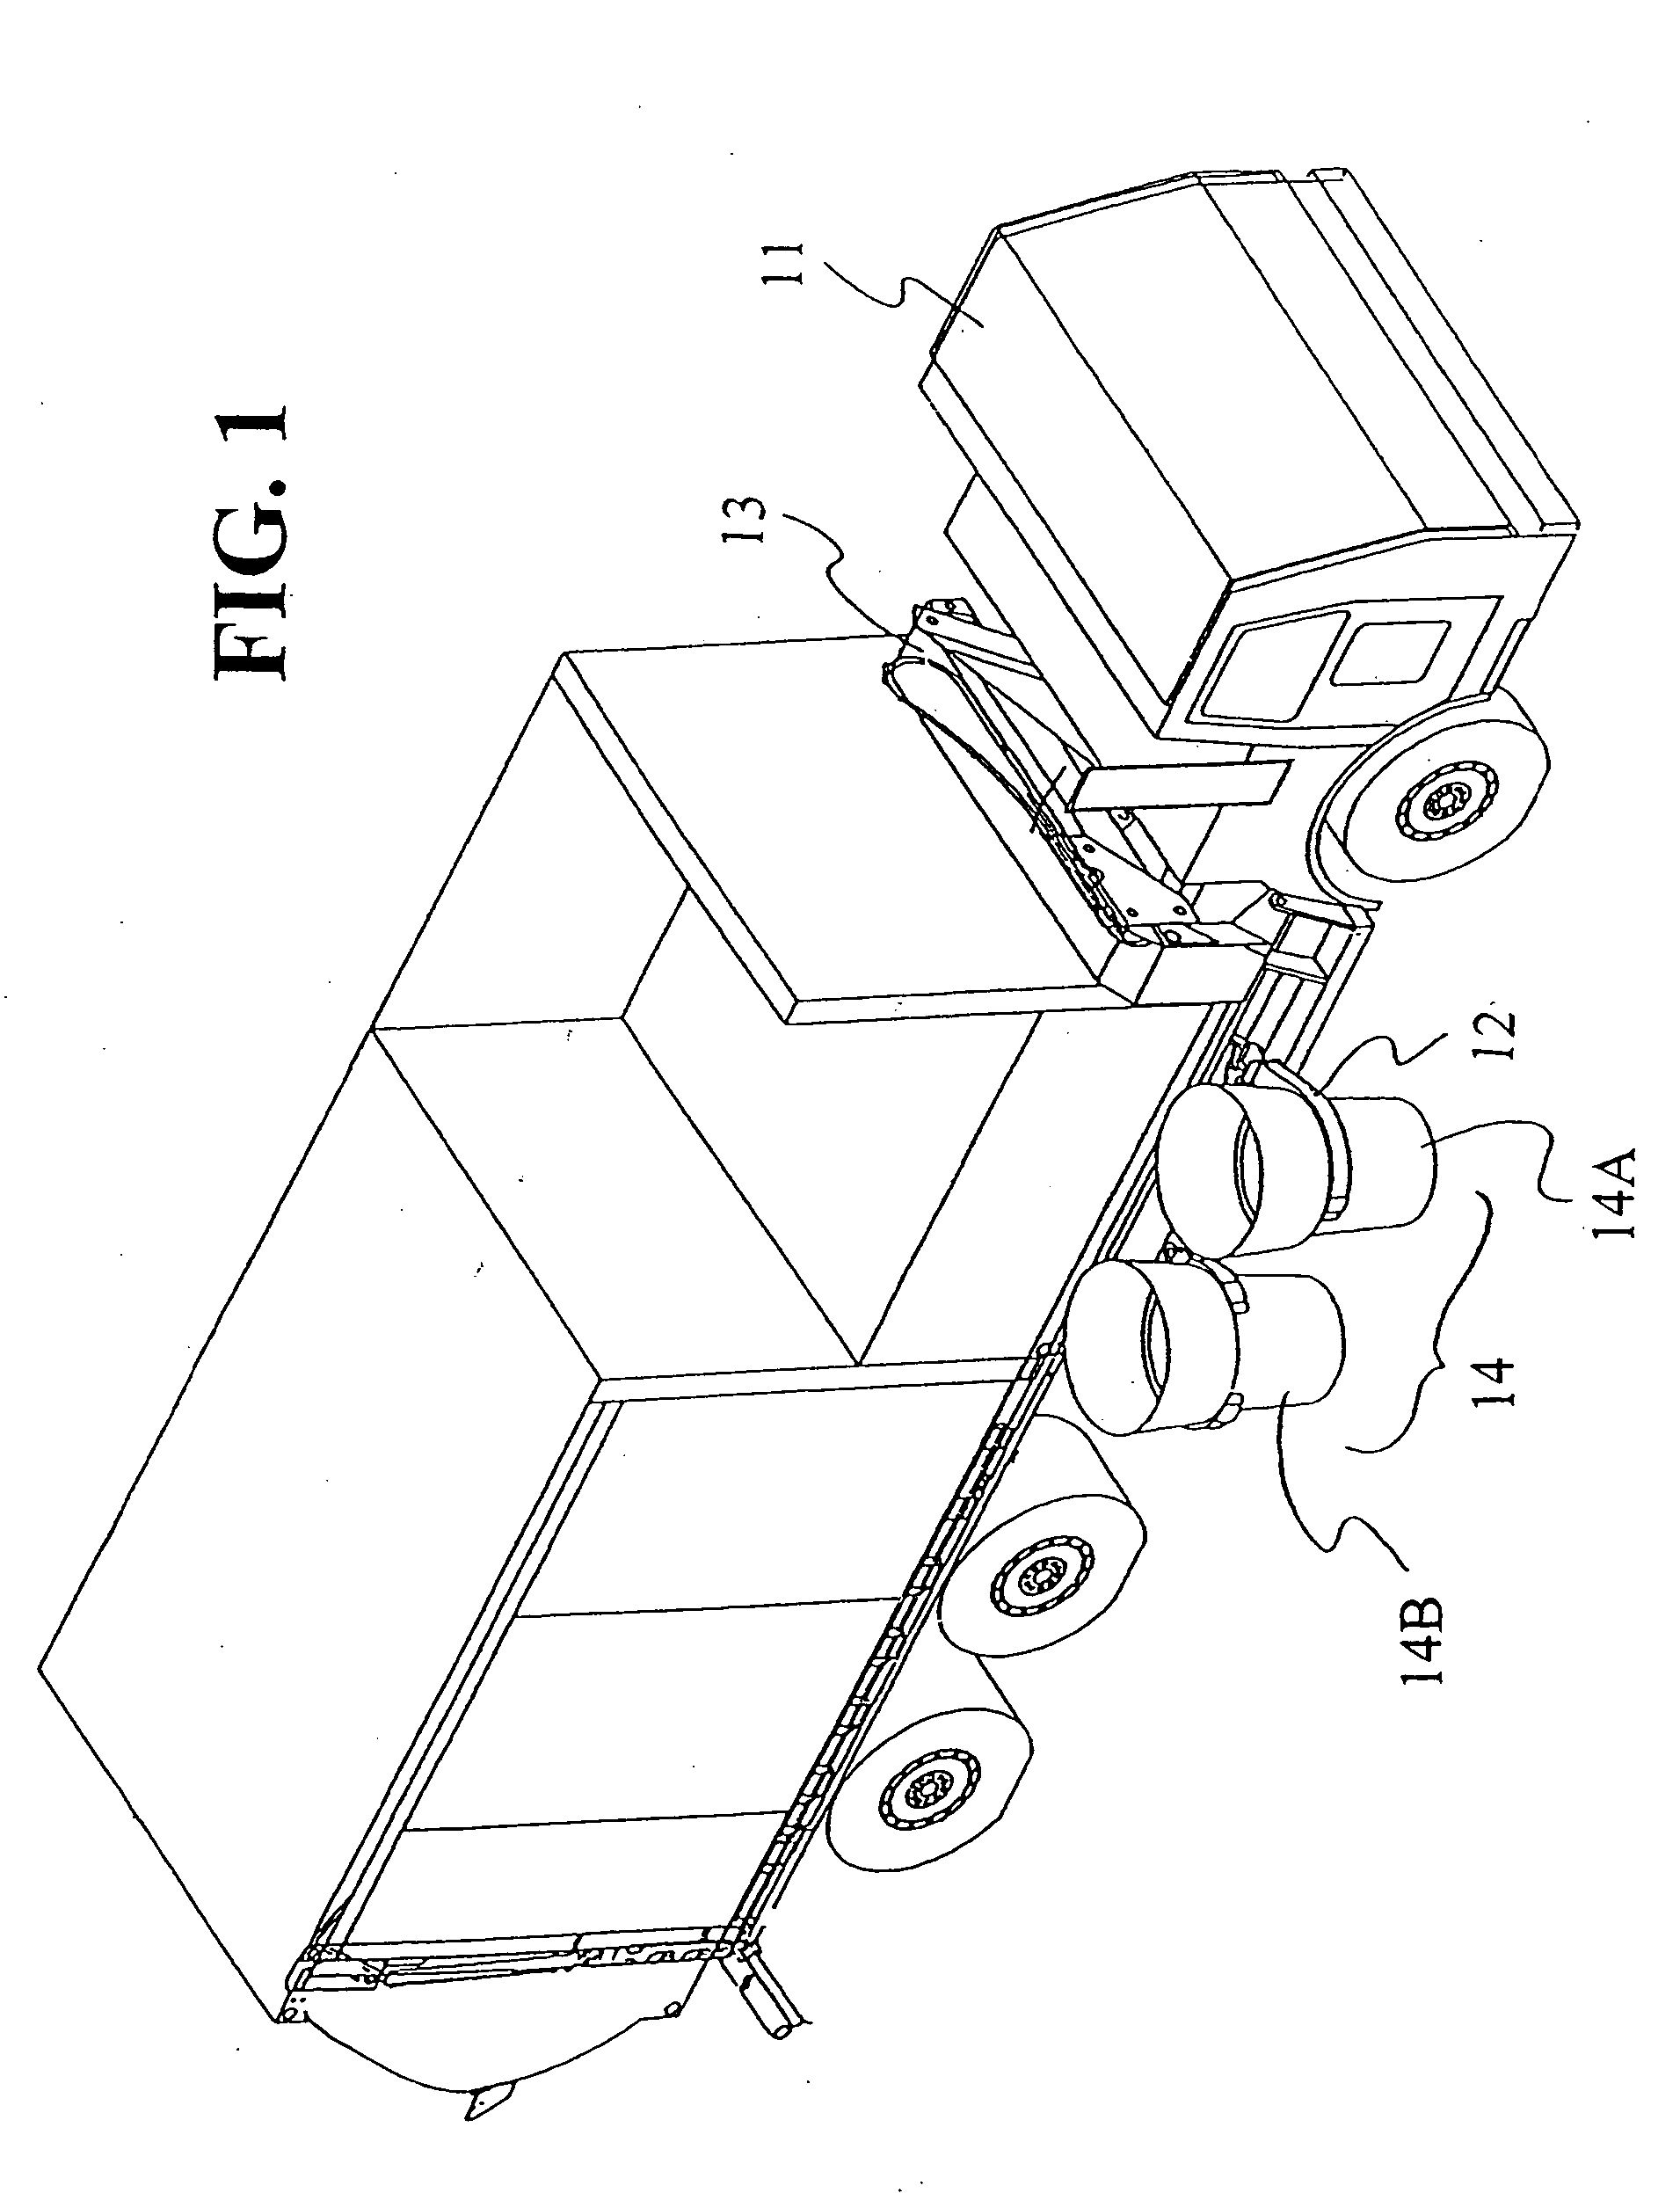 Method and apparatus for gripping containers